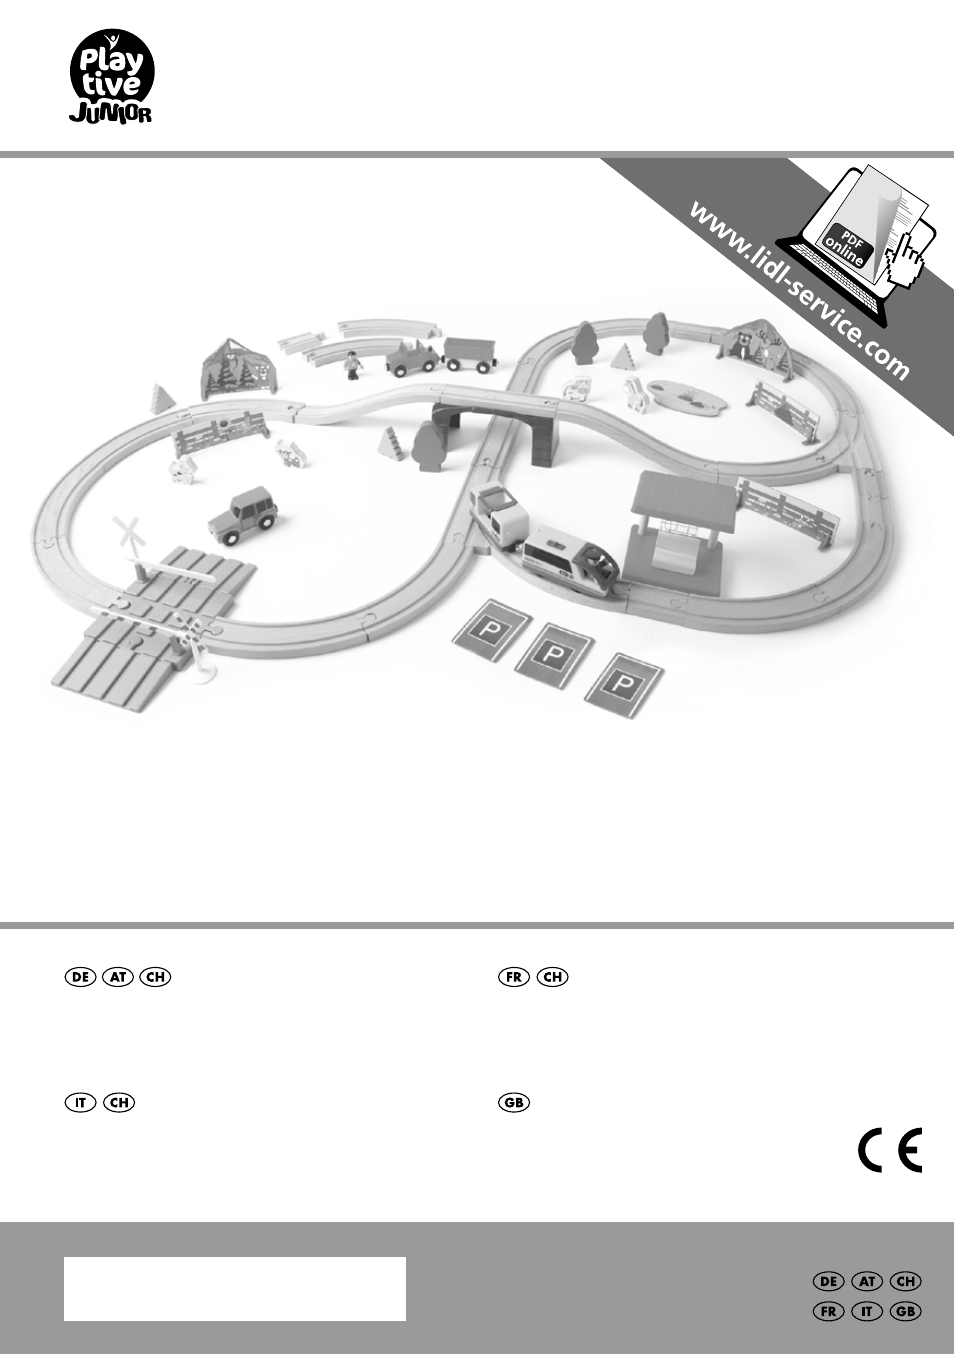 PLAYTIVE PASSENGER TRAIN INSTRUCTIONS FOR USE MANUAL Pdf Download